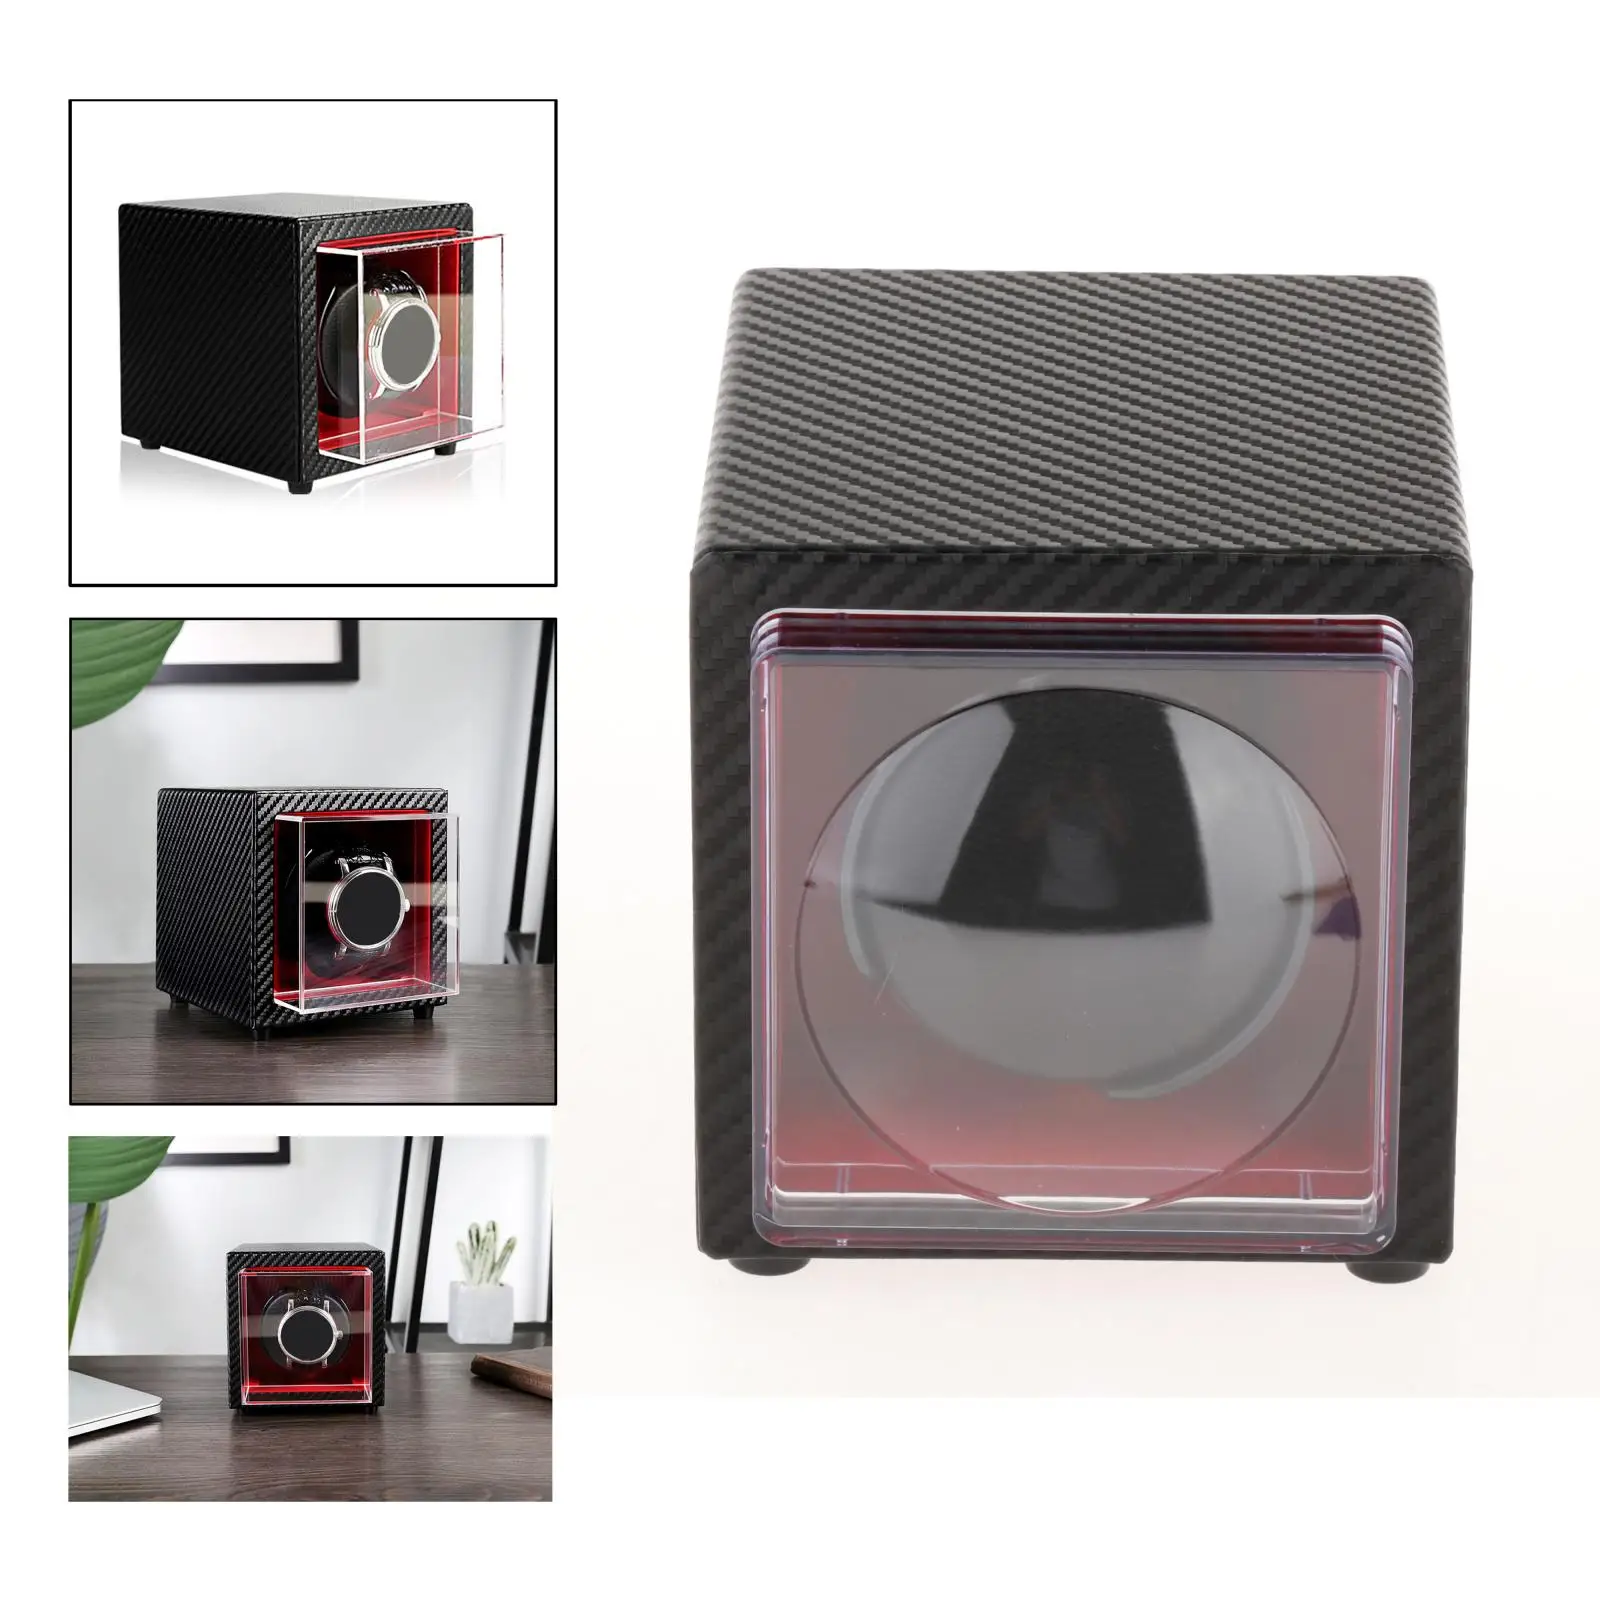 Automatic Watch Winder Watches Storage Collector Winder Box Clock Accessories Battery Powered or AC Adapter 5 Rotation Modes